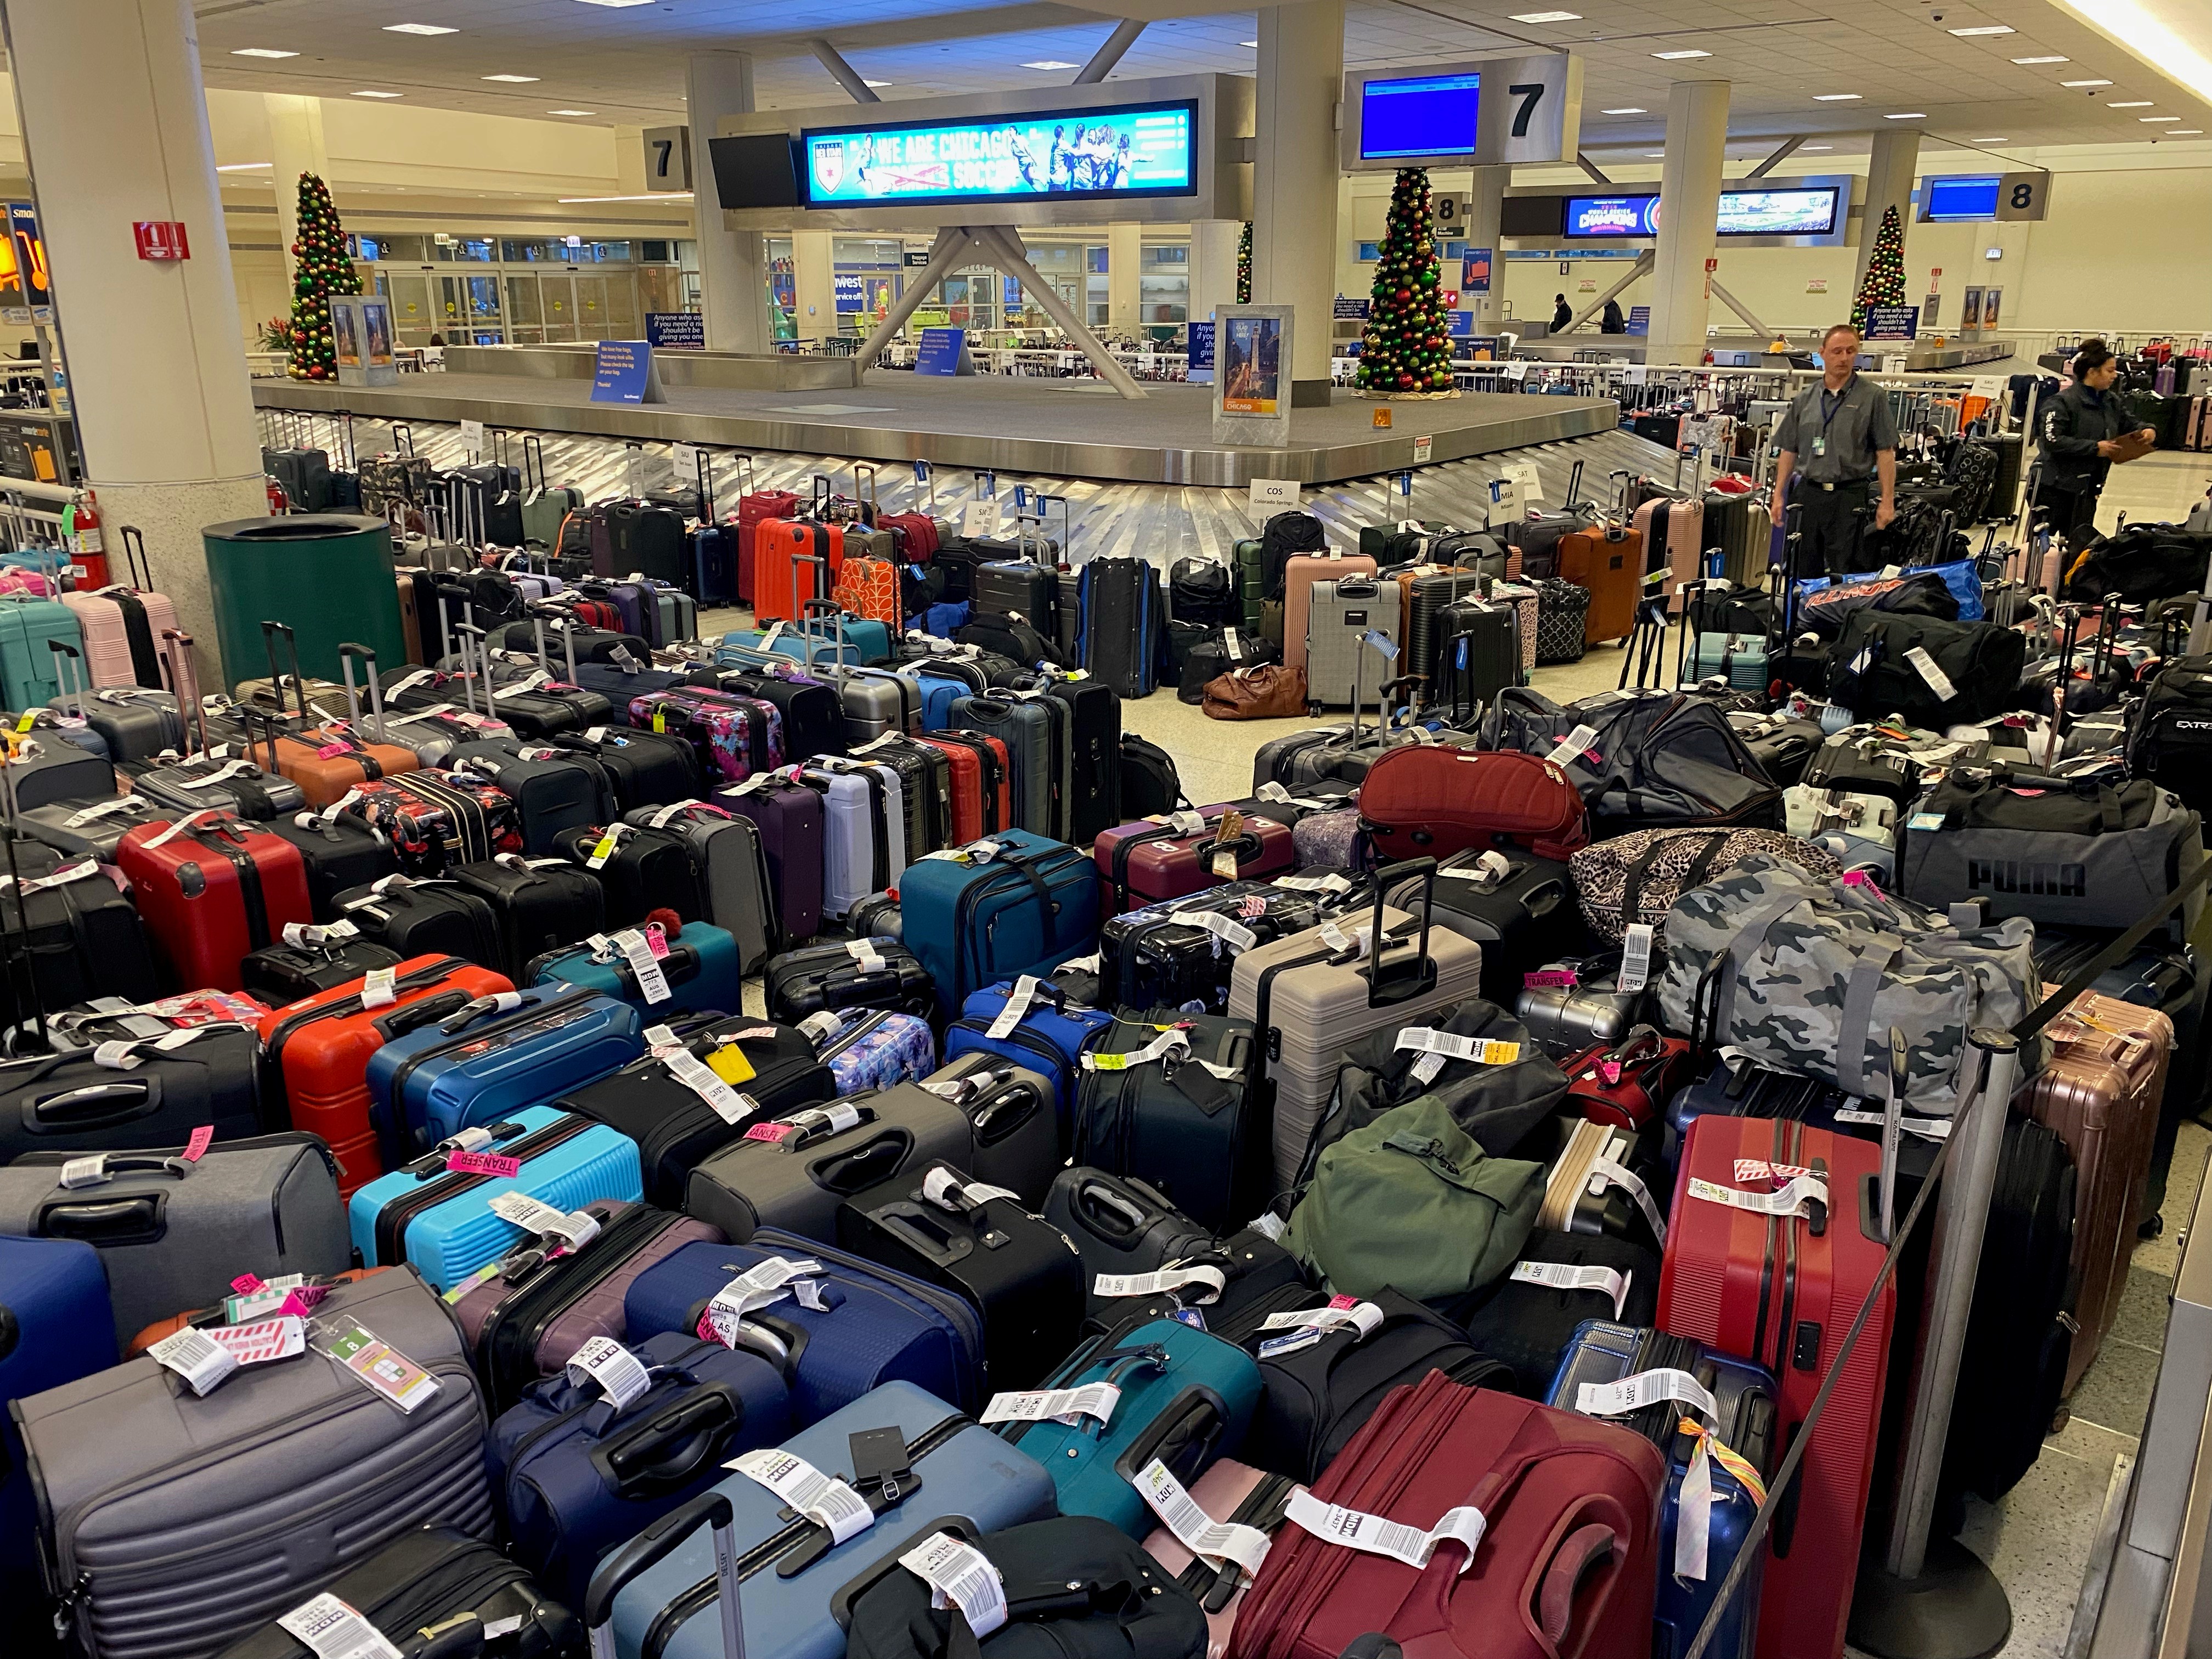 How Credit Cards Can Help You Deal With Lost Luggage During The Holidays